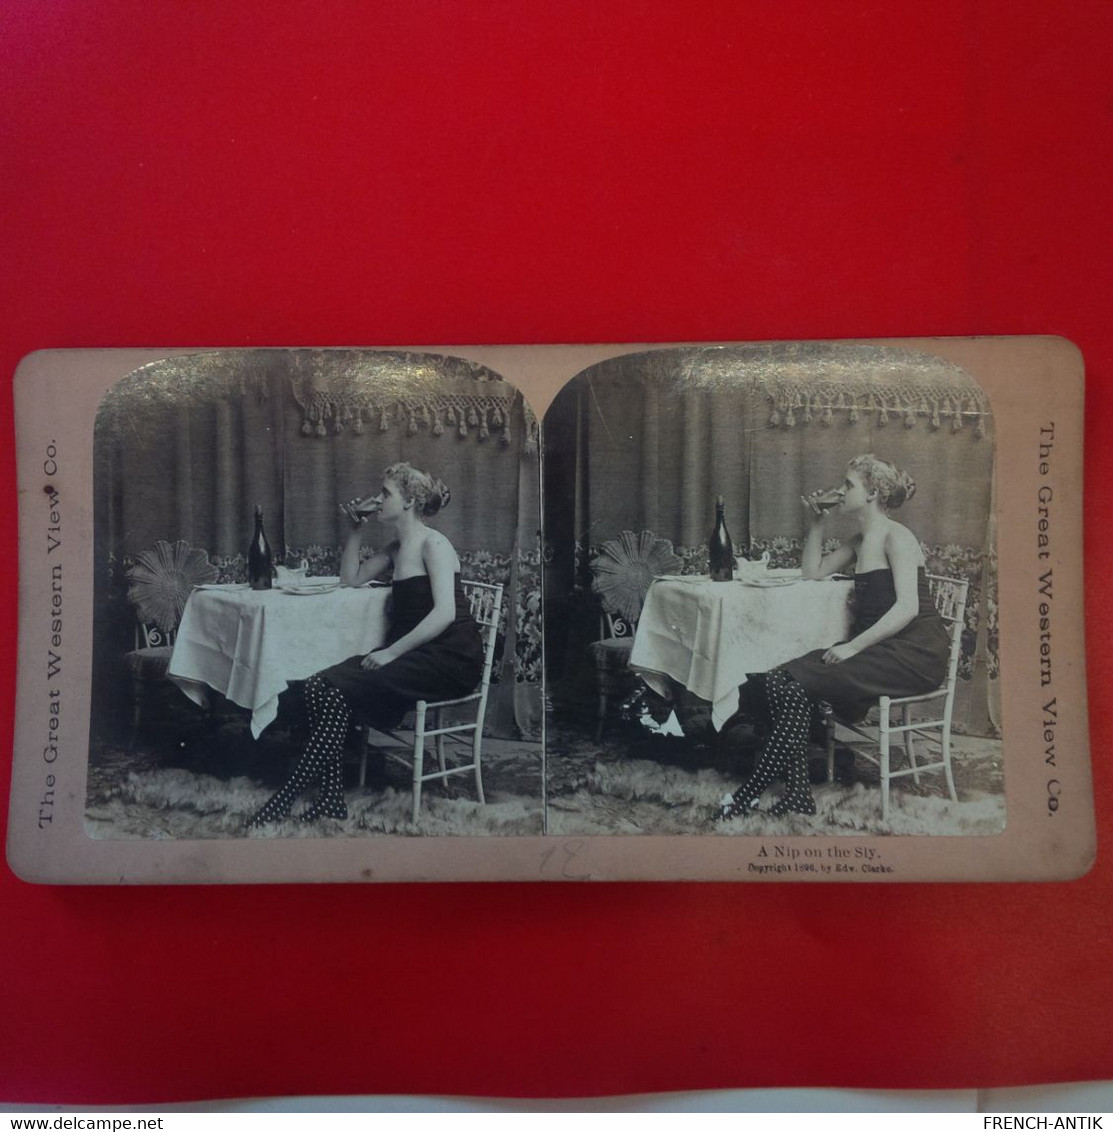 PHOTO STEREO A NIP ONT HE SLY - Stereoscopic